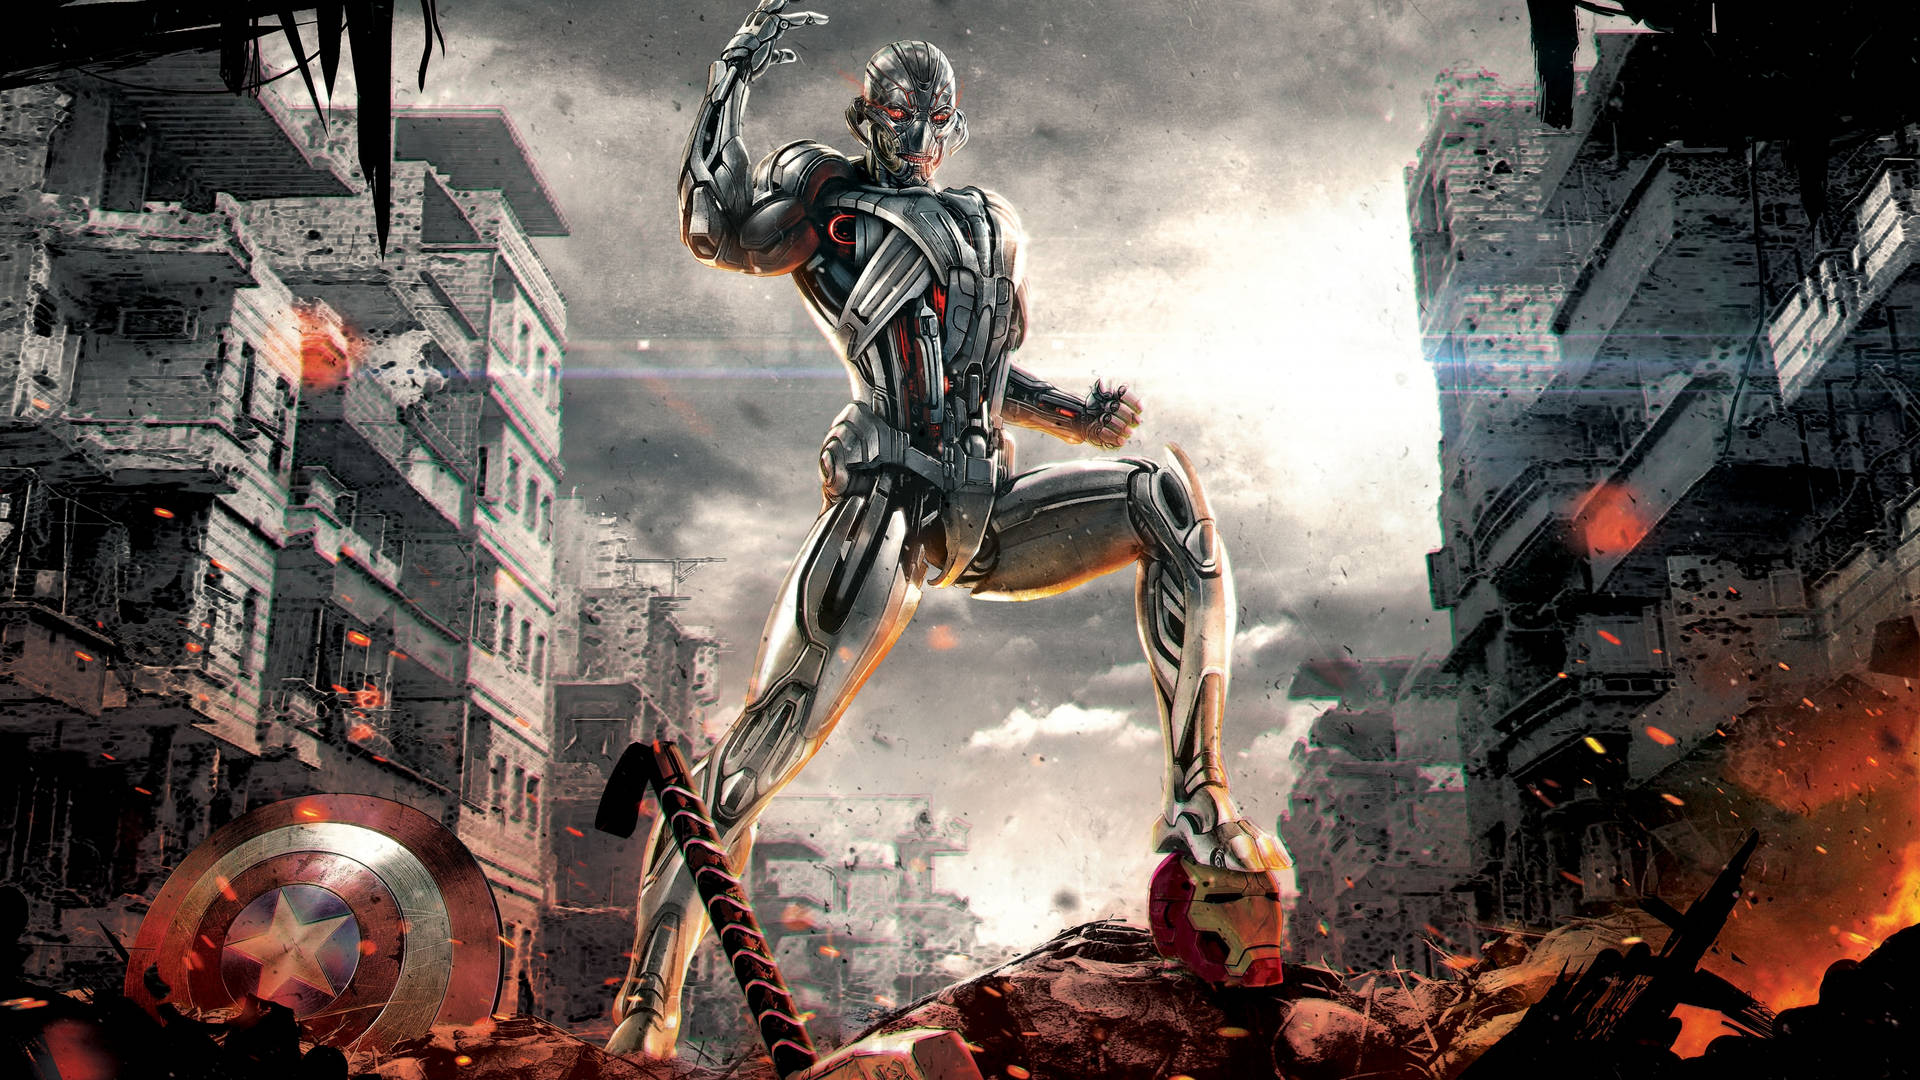 Free Ultron Wallpaper Downloads, [100+] Ultron Wallpapers for FREE |  